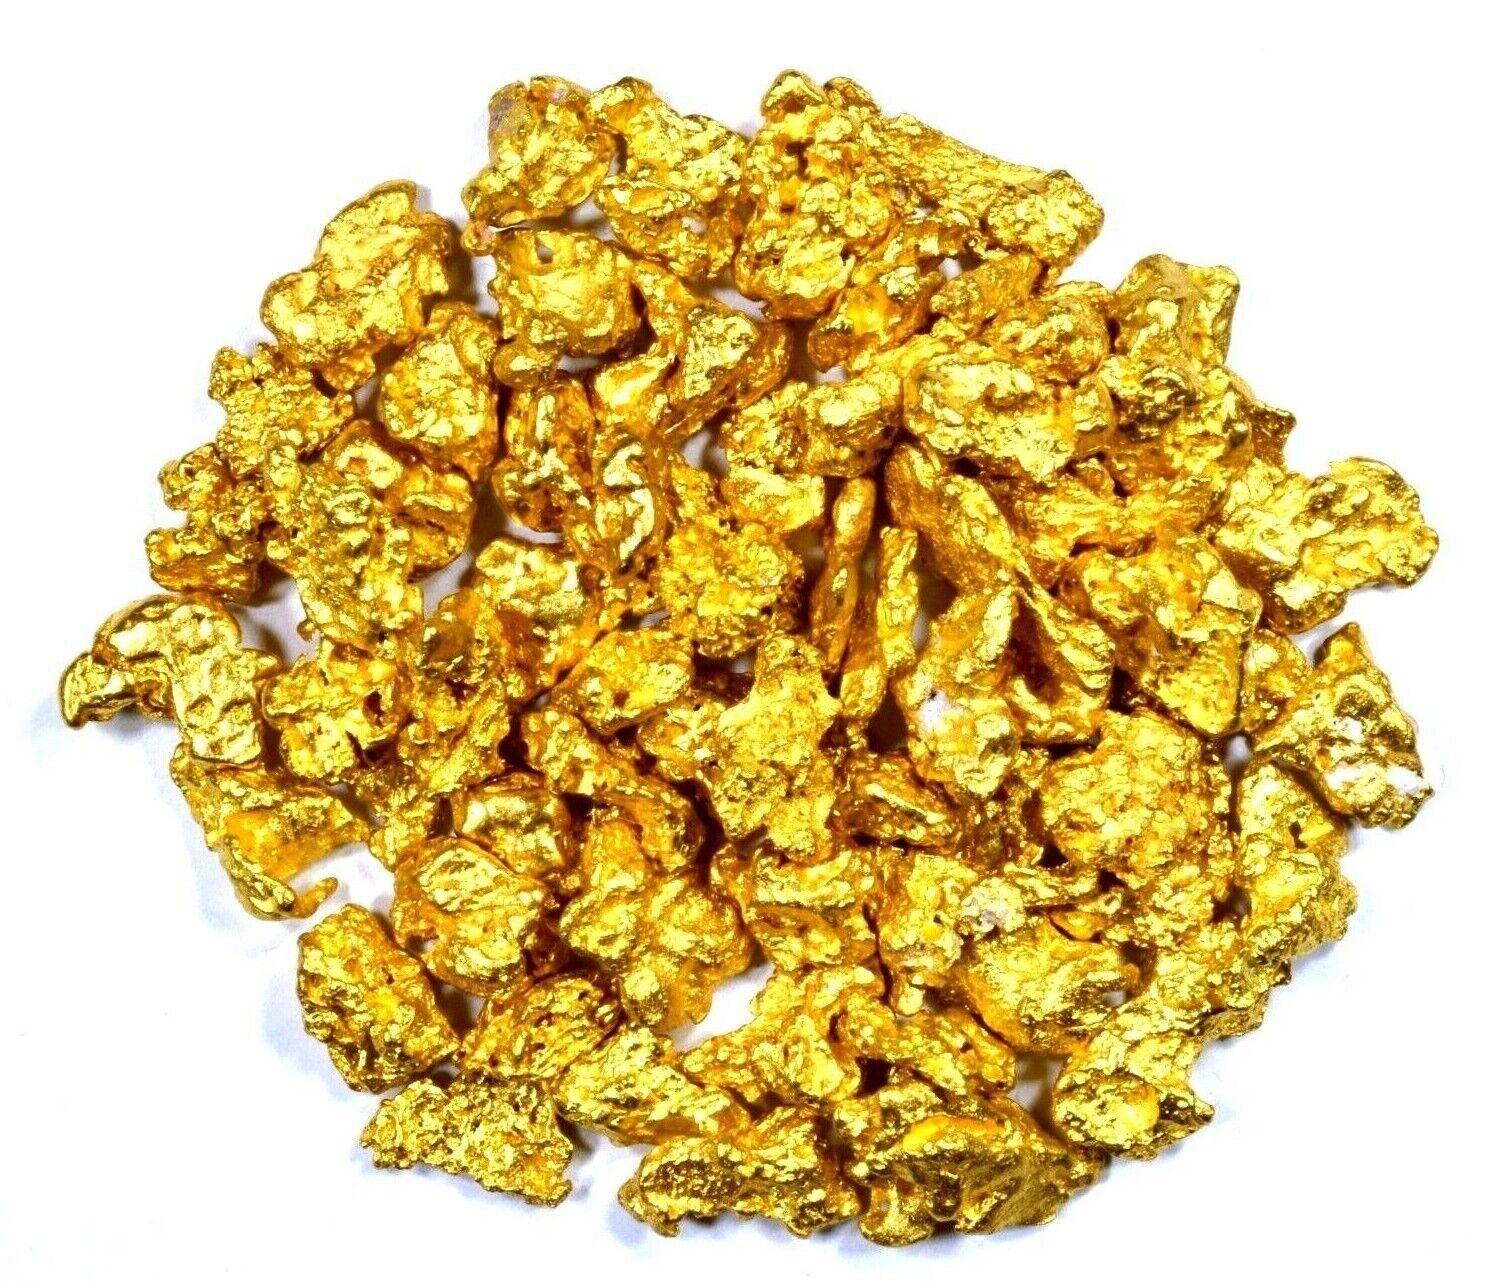 10.000 GRAMS AUSTRALIAN NATURAL PURE GOLD NUGGETS #6 MESH WITH BOTTLE (#AUB600)